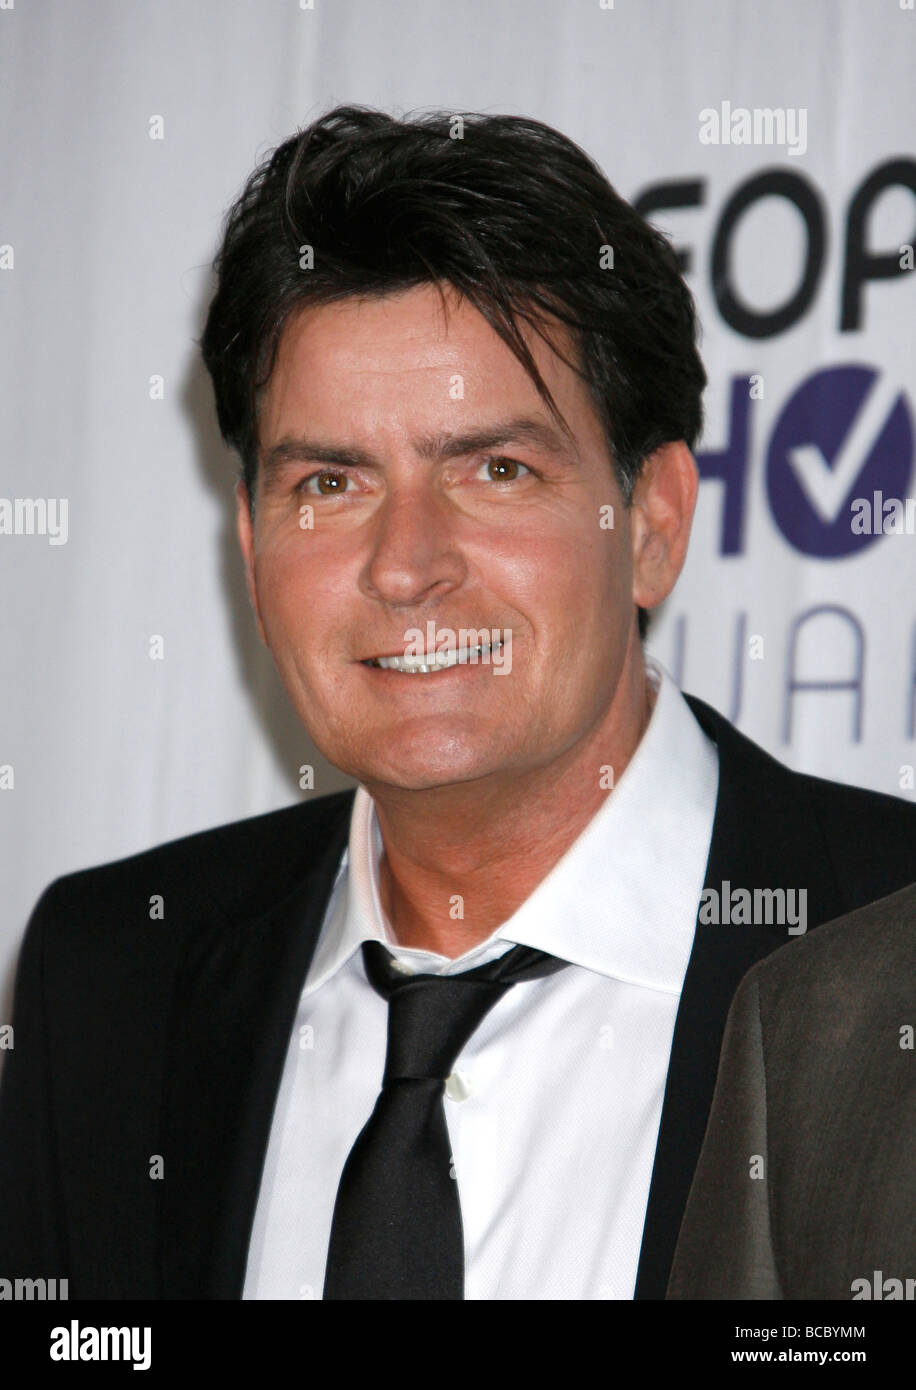 CHARLIE SHEEN  - US film actor in January  2009 Stock Photo